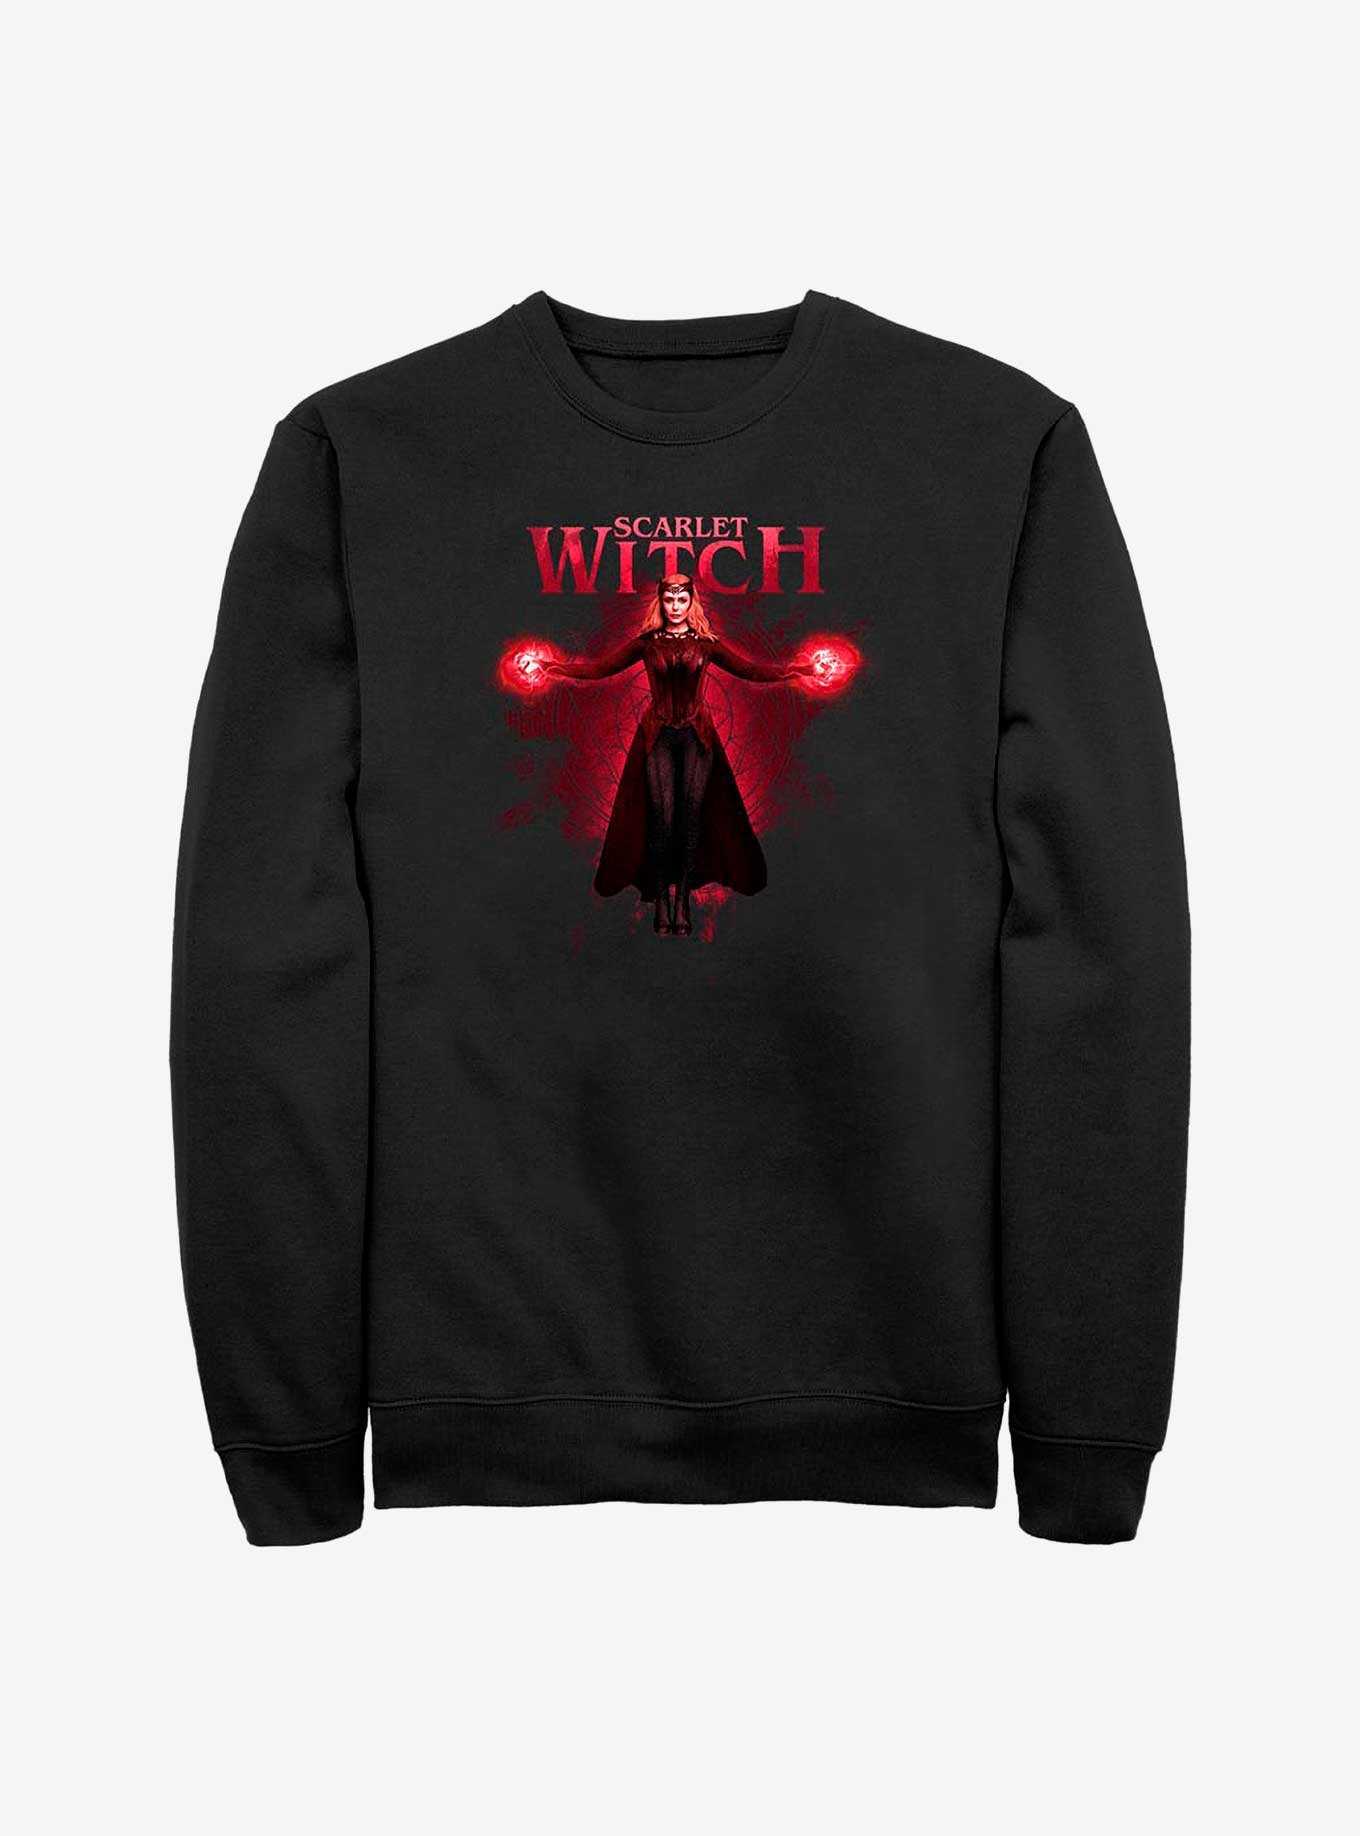 Marvel Doctor Strange in the Multiverse of Madness Scarlet Witch Sweatshirt, , hi-res